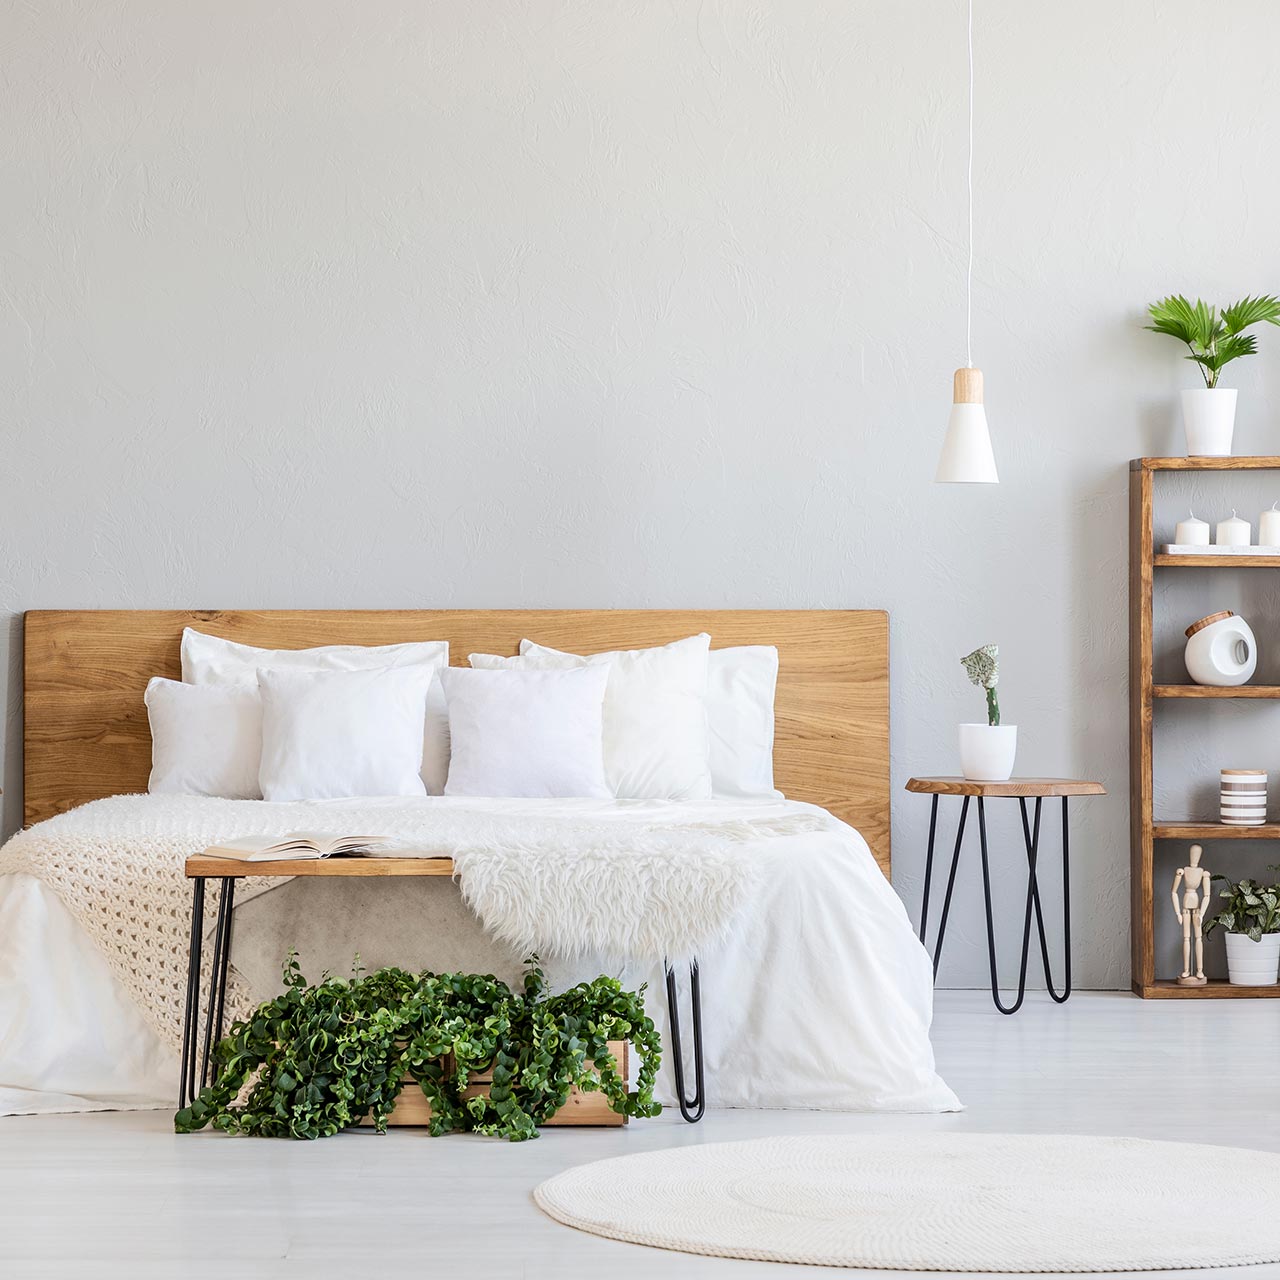 Scandinavian style bedroom designs are characterised by the minimal decor